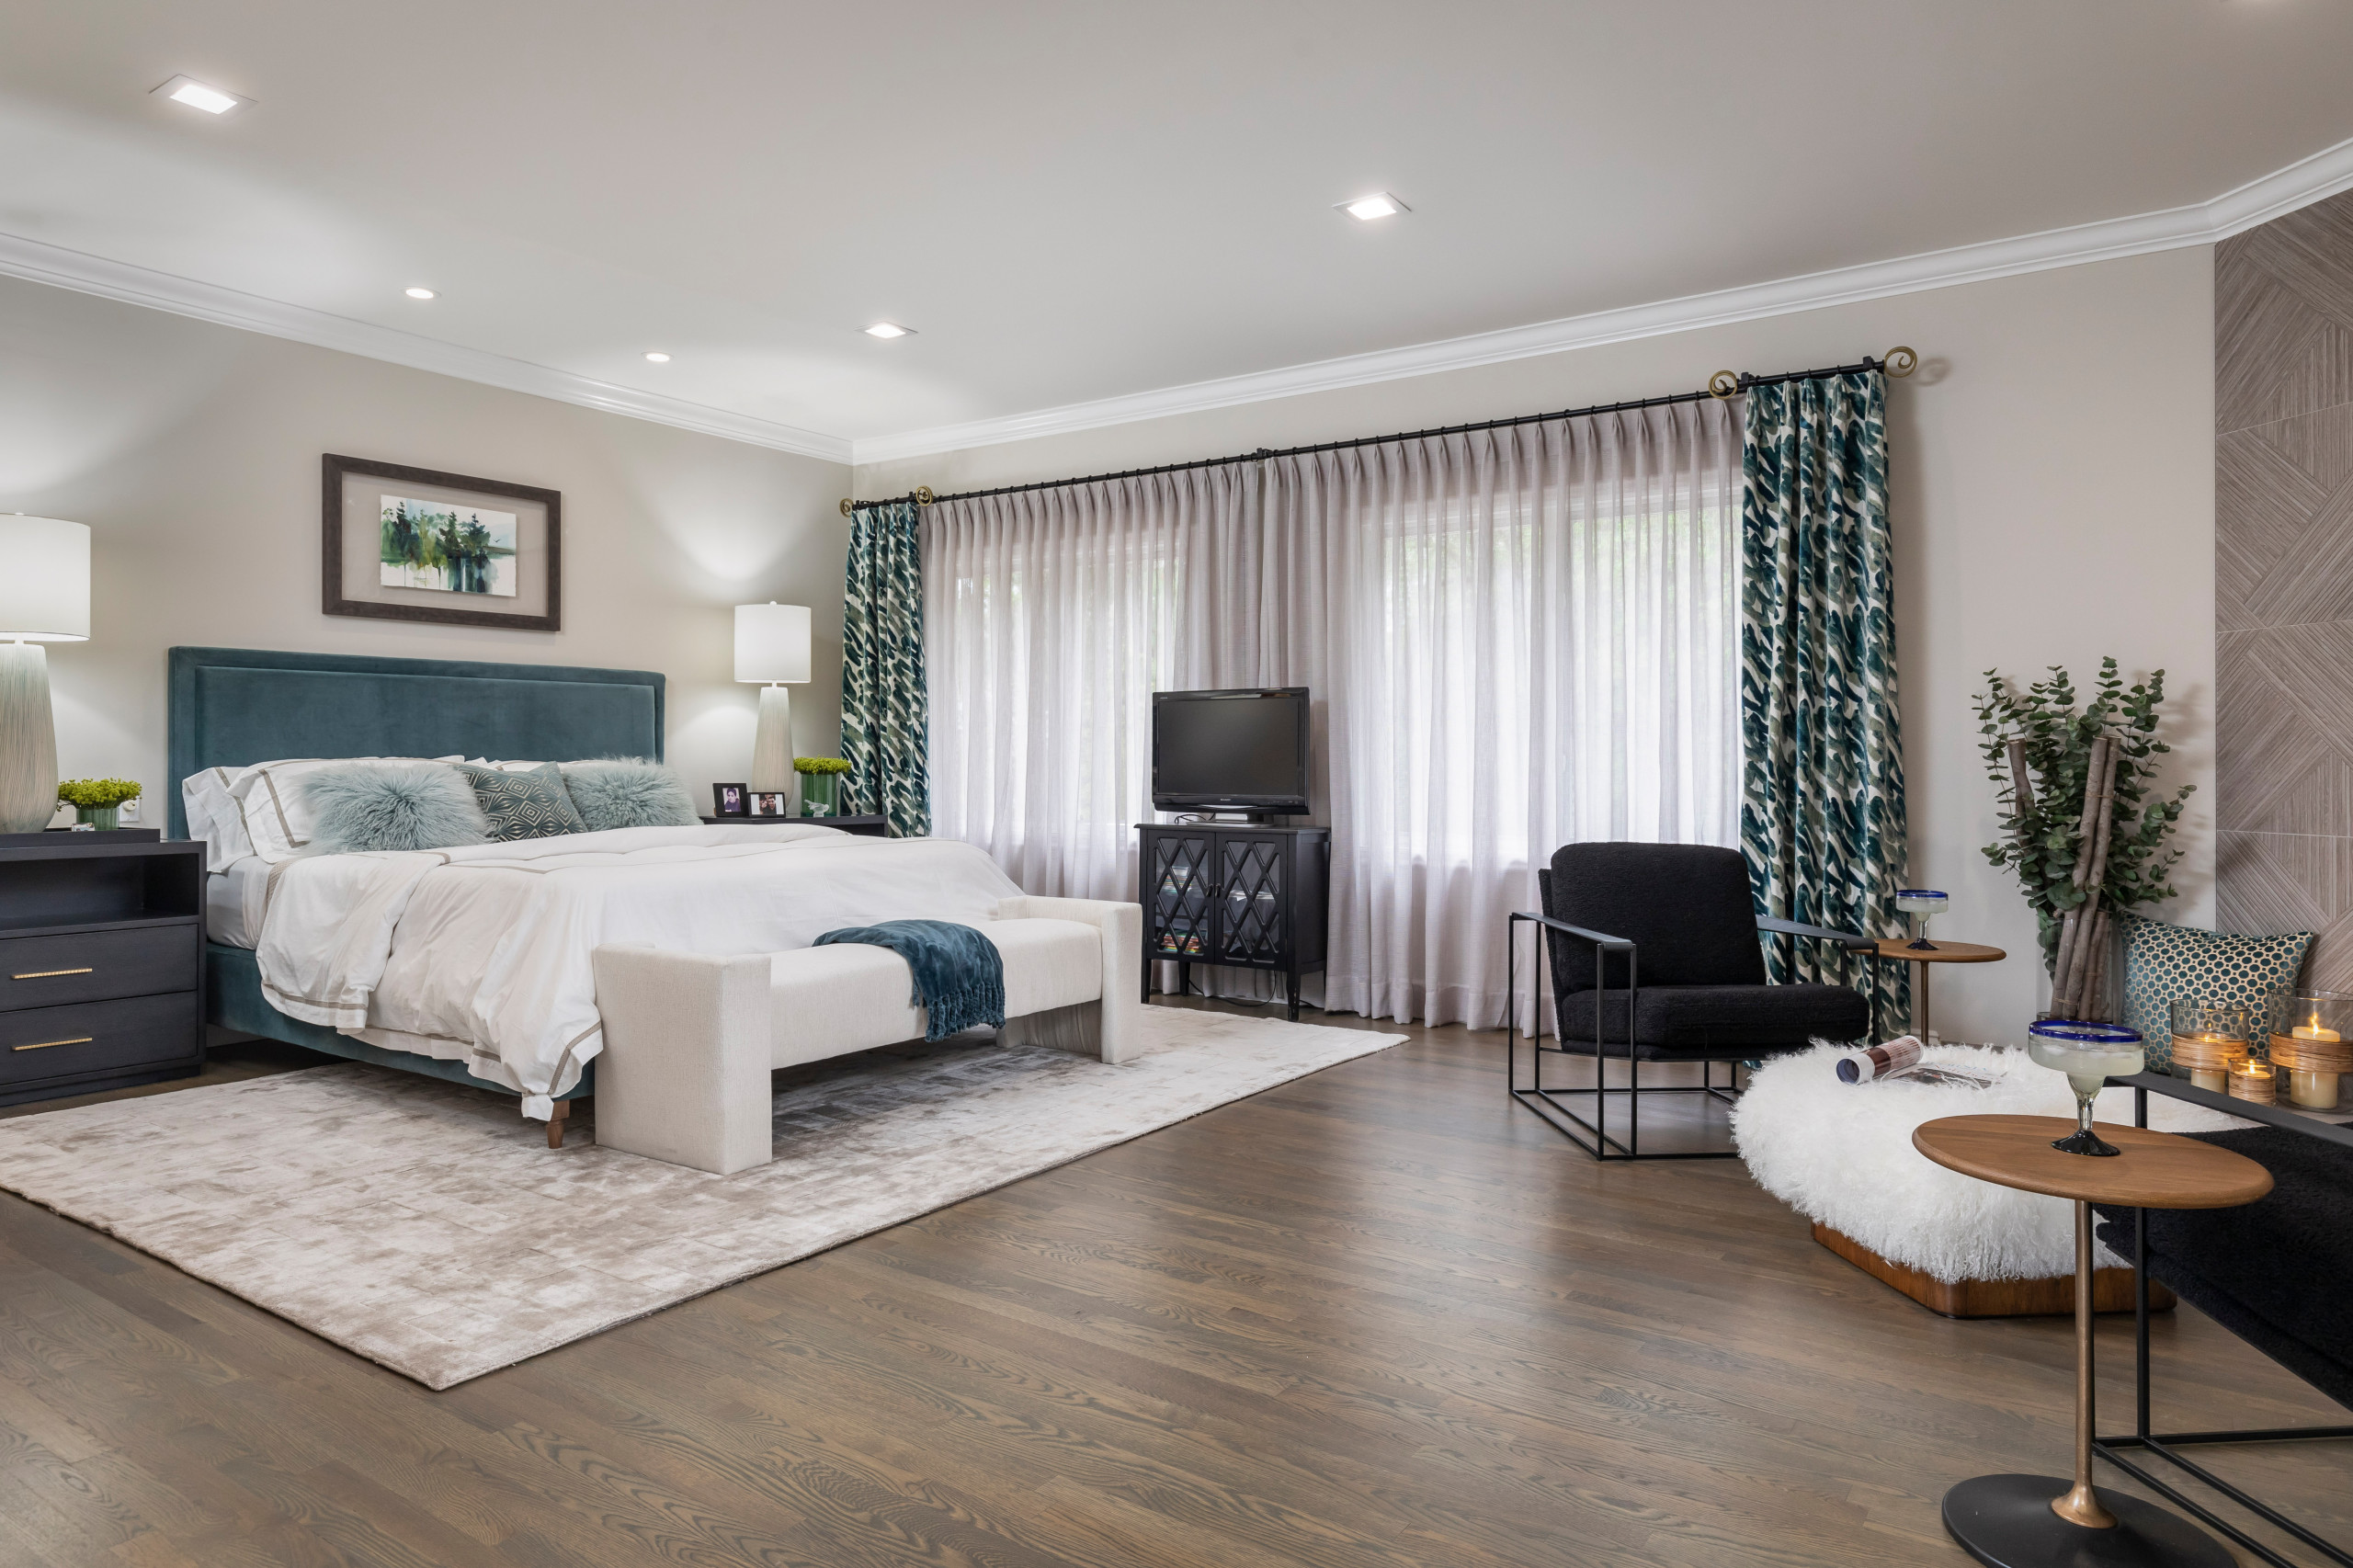 A Remodeled Master Bedroom with two en suites